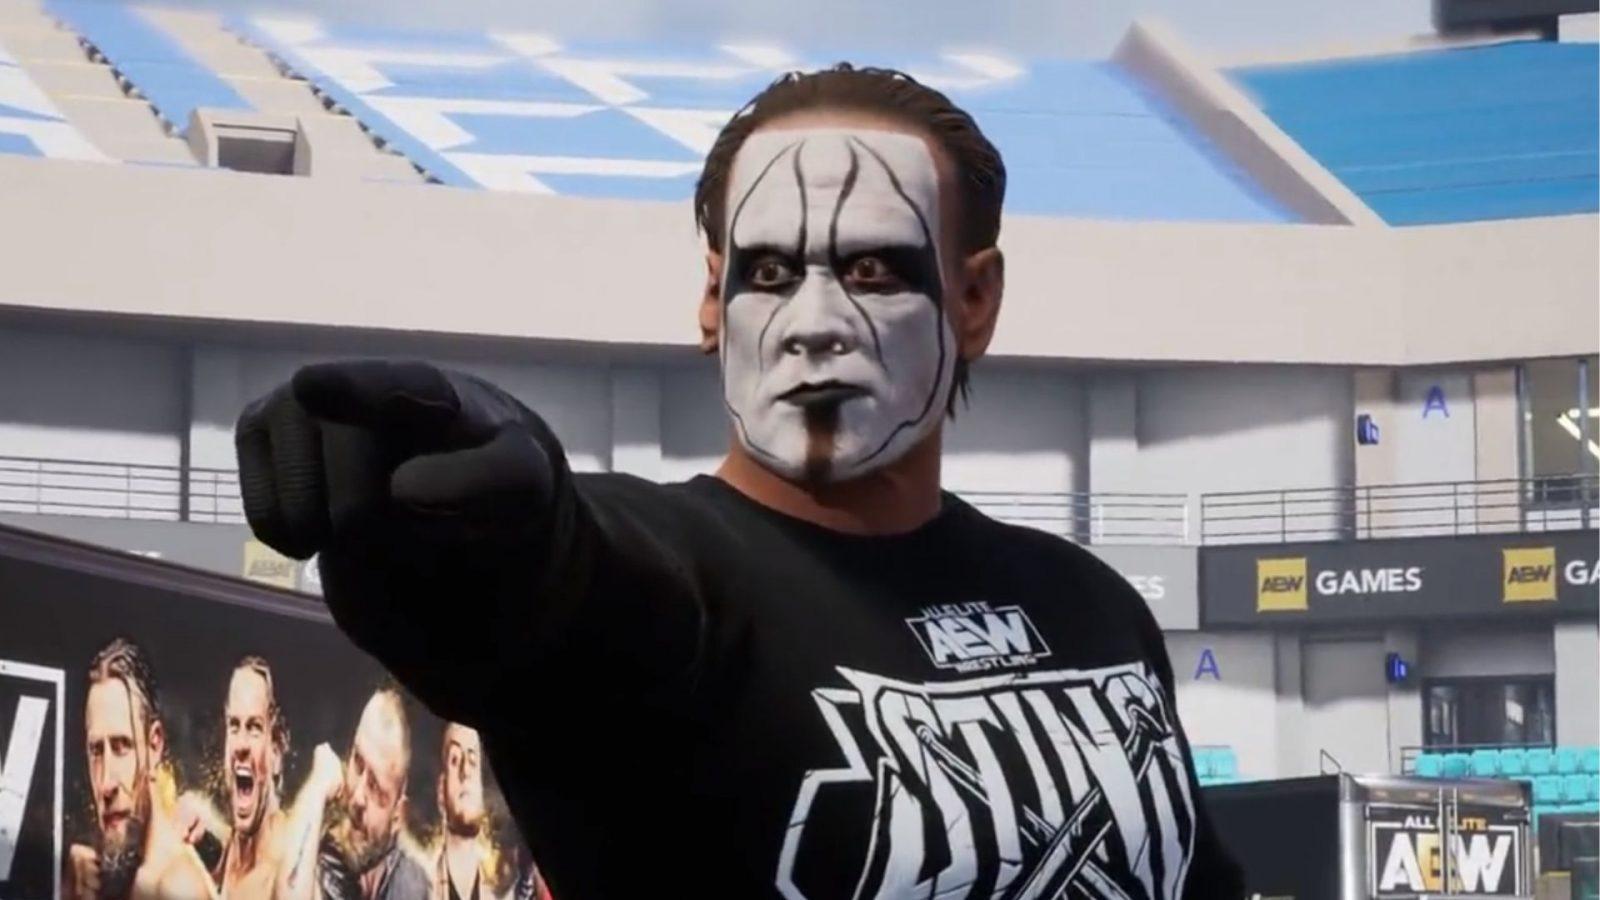 sting pointing in aew fight forever stadium stampede battle royale mode